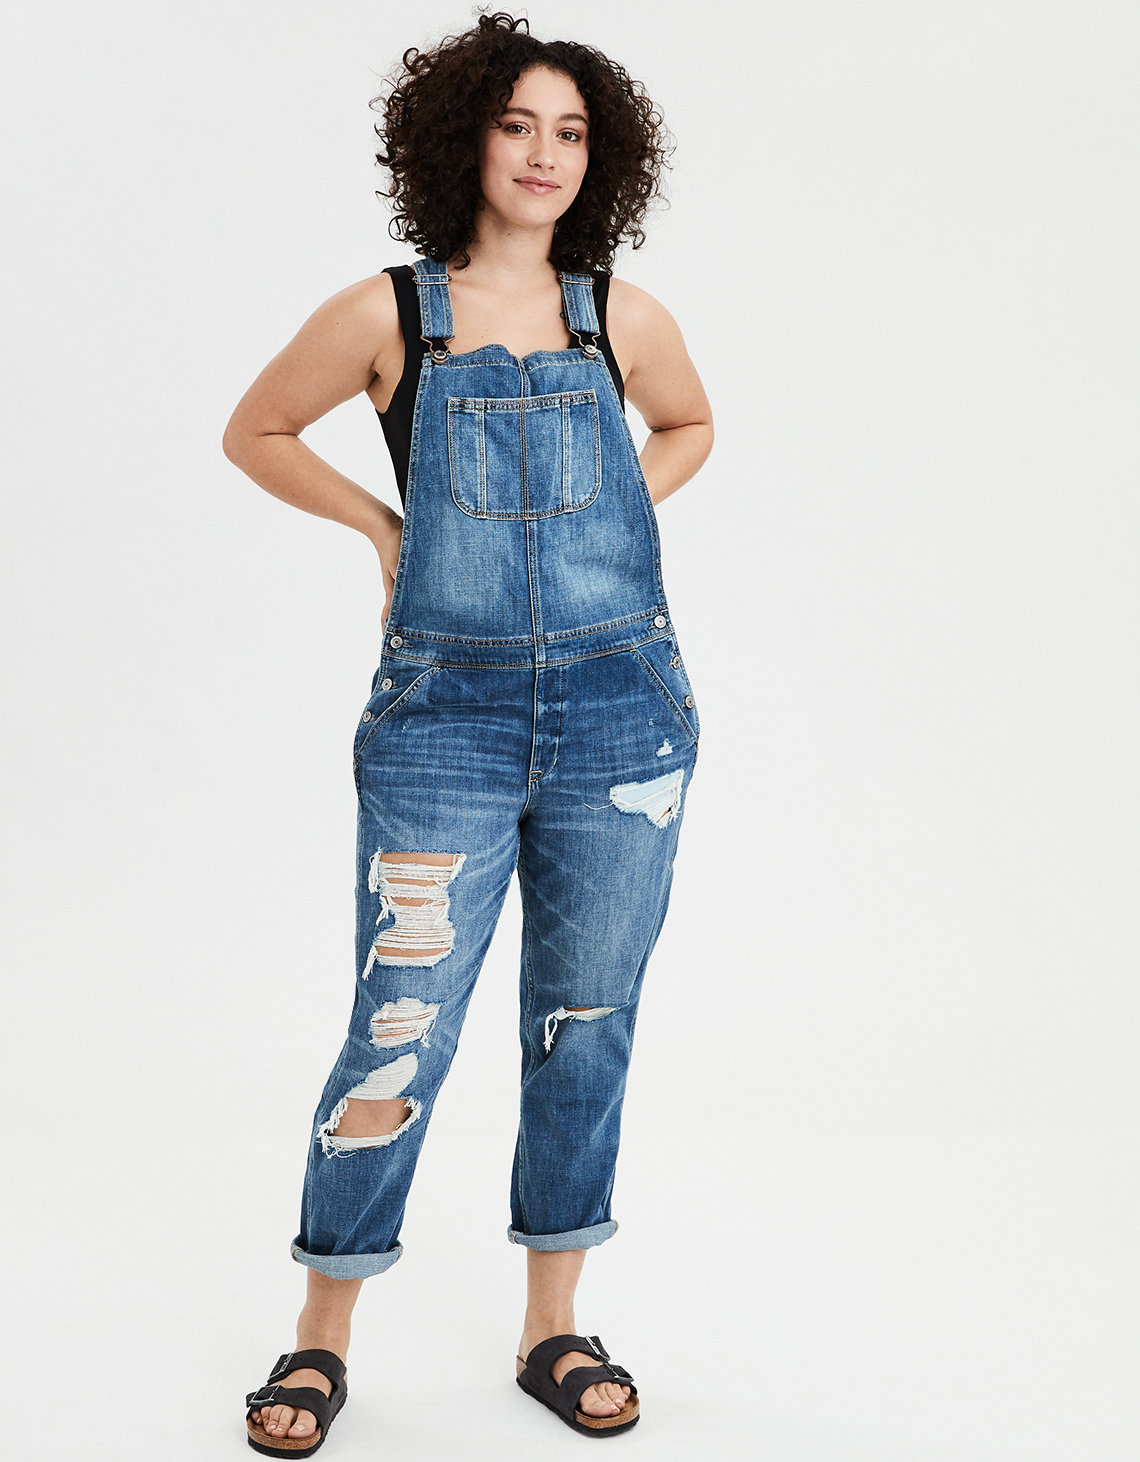 Eagle Gallery: American Eagle Tomgirl Overalls